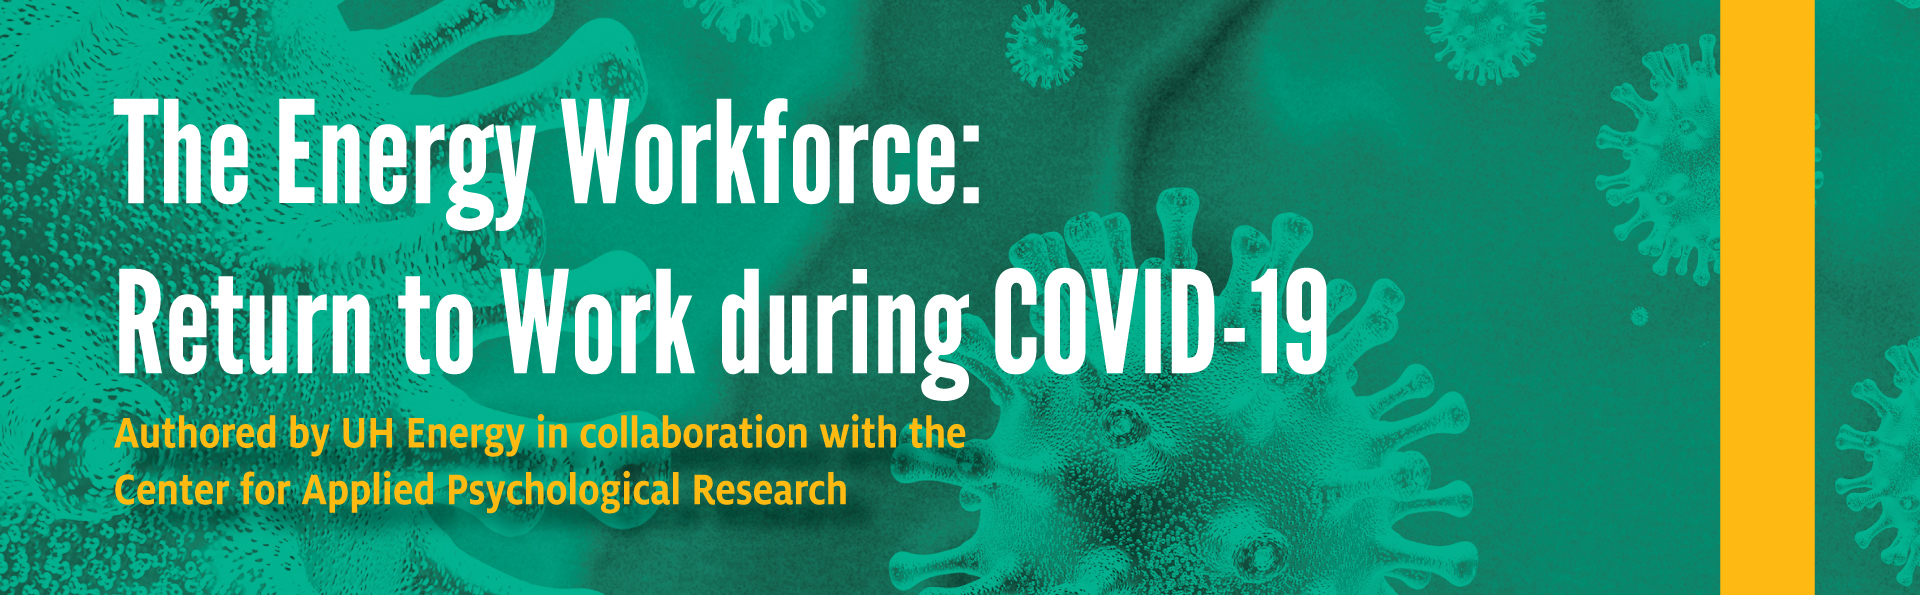 The Energy Workforce: Return To Work During COVID-19